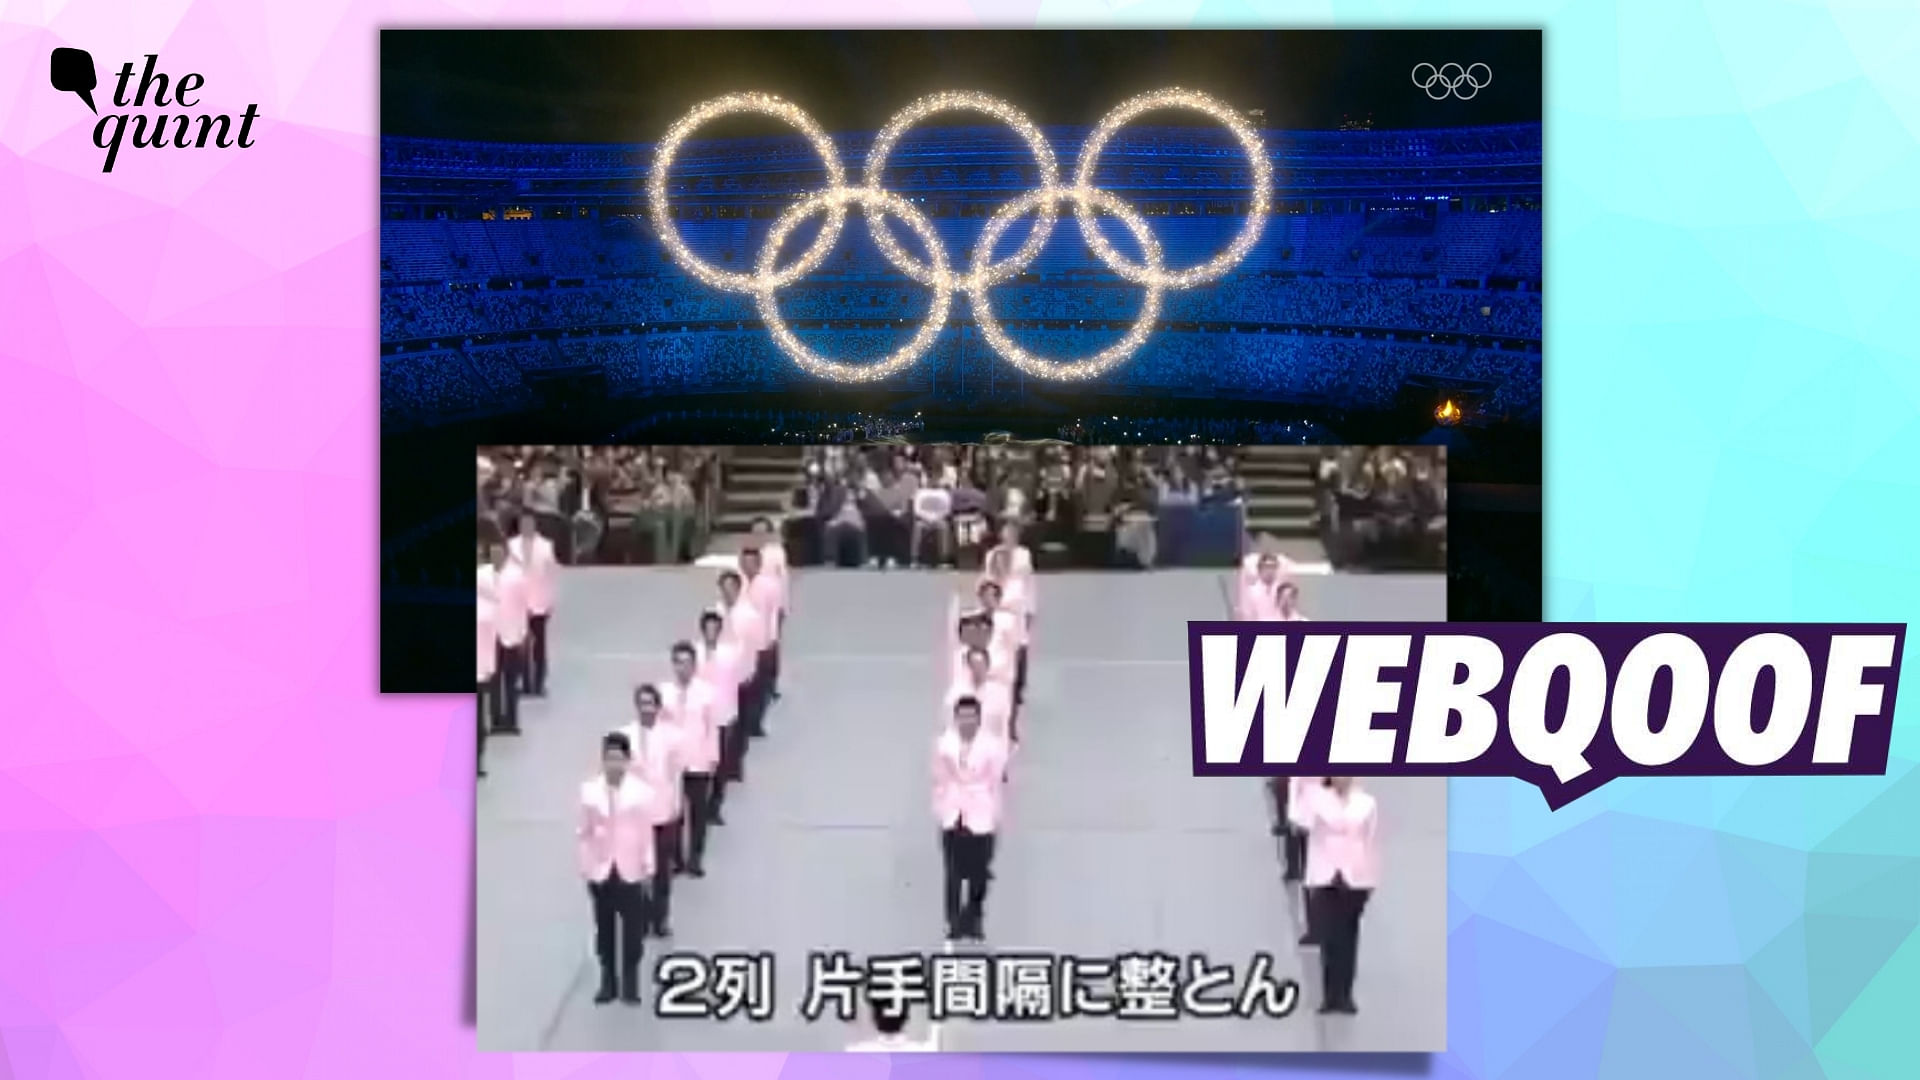 <div class="paragraphs"><p>The claim says the video is from the closing ceremony of the 2020 Tokyo Olympics.</p></div>